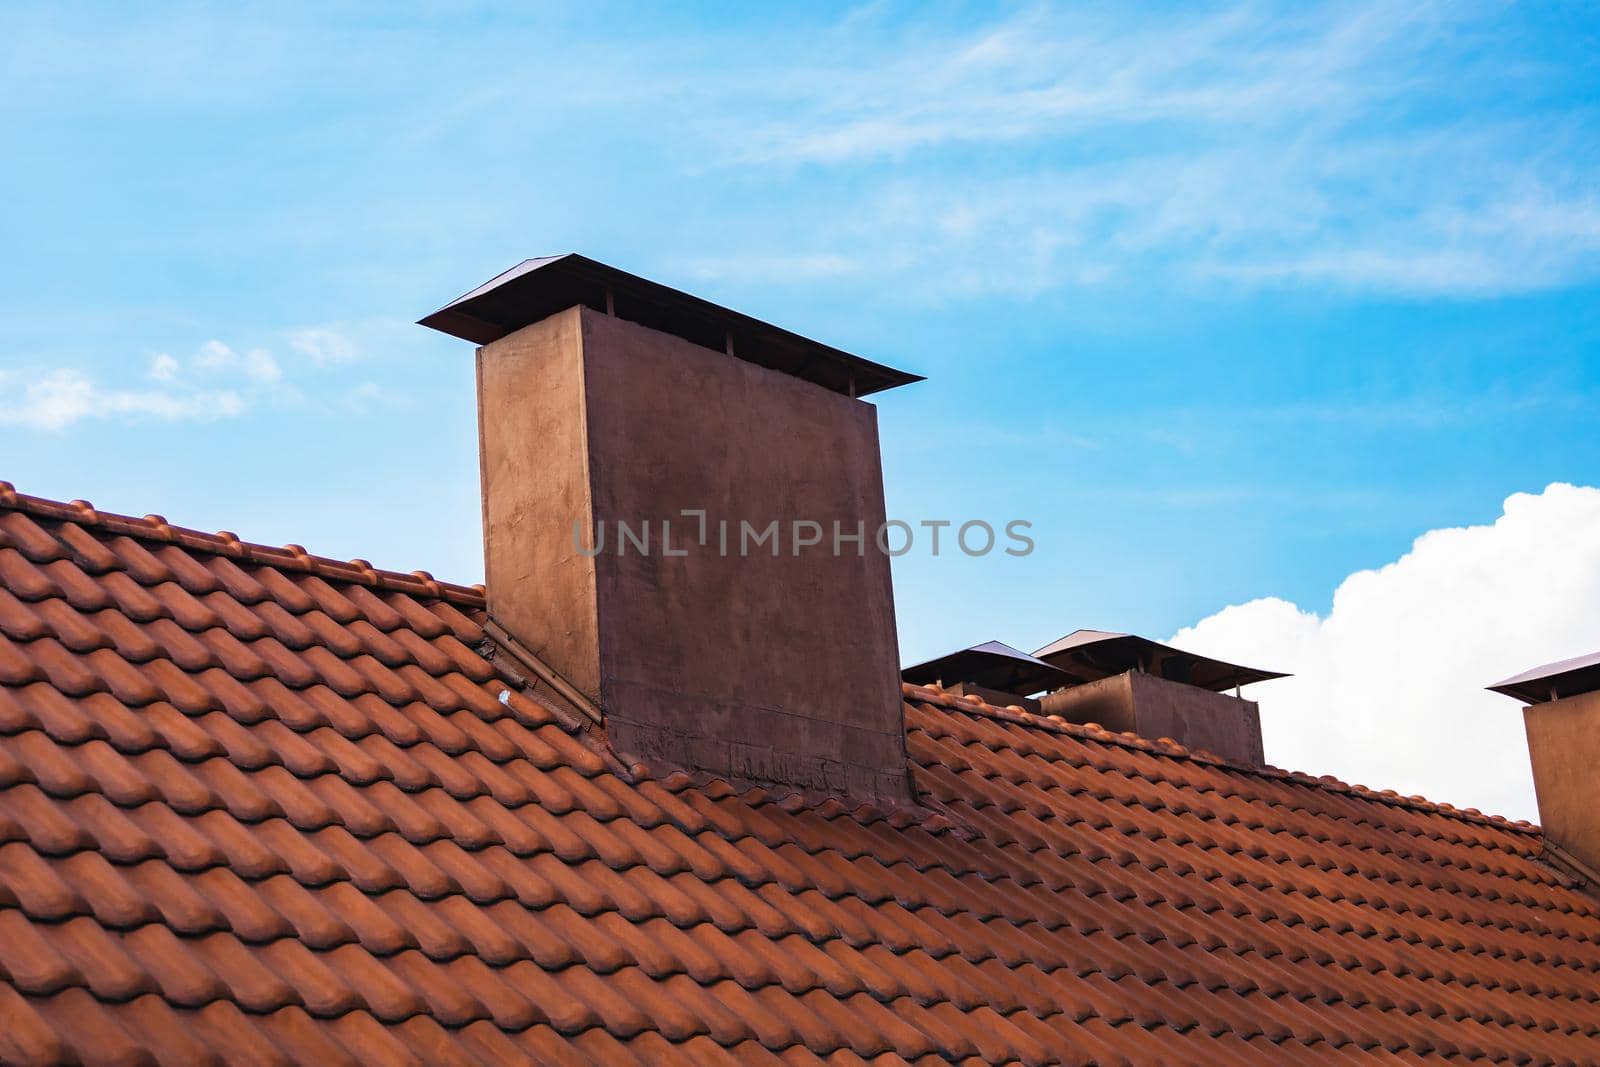 Red roof tiles with red chimney on blue sky background. Old and used overlapping red classic style roofing material. Spanish tiled roof. Mediterranean architecture